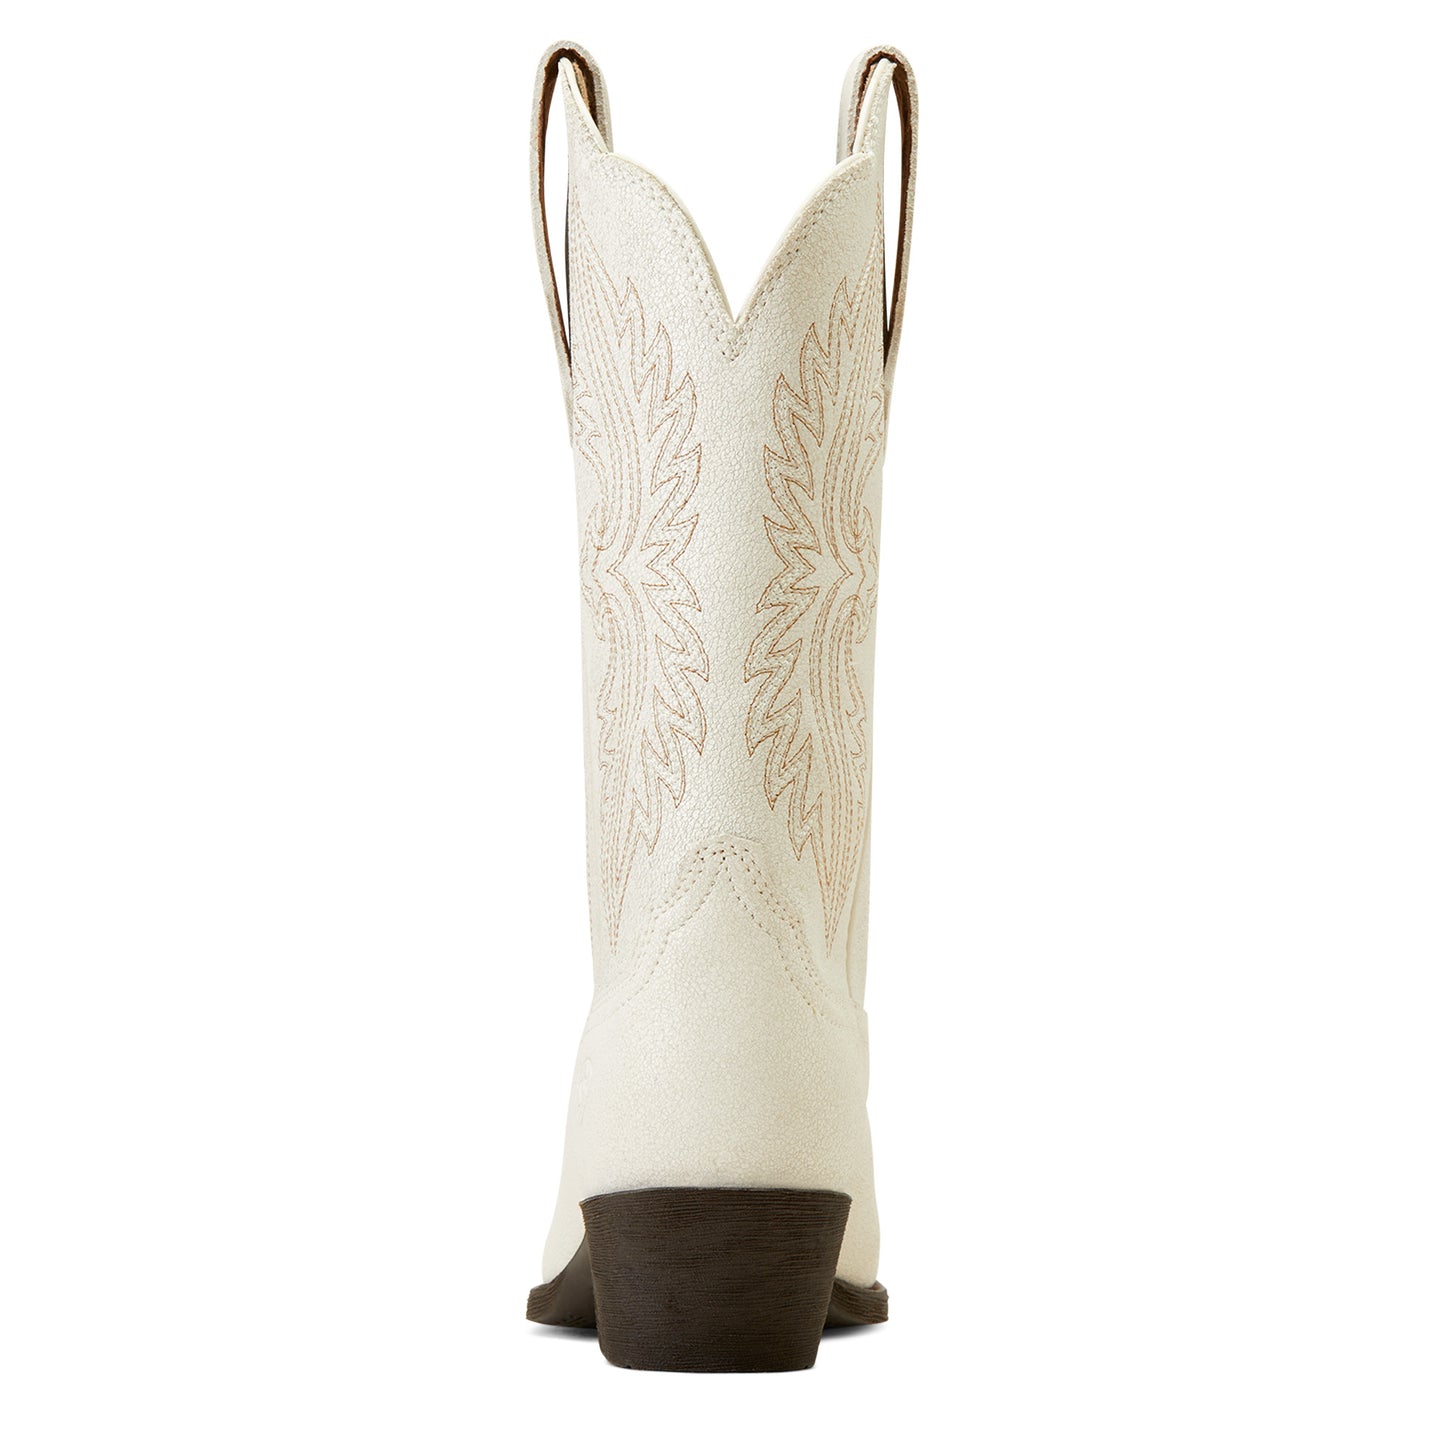 Ariat Ladies Heritage R StretchFit Distressed Ivory Western Boots 10046898